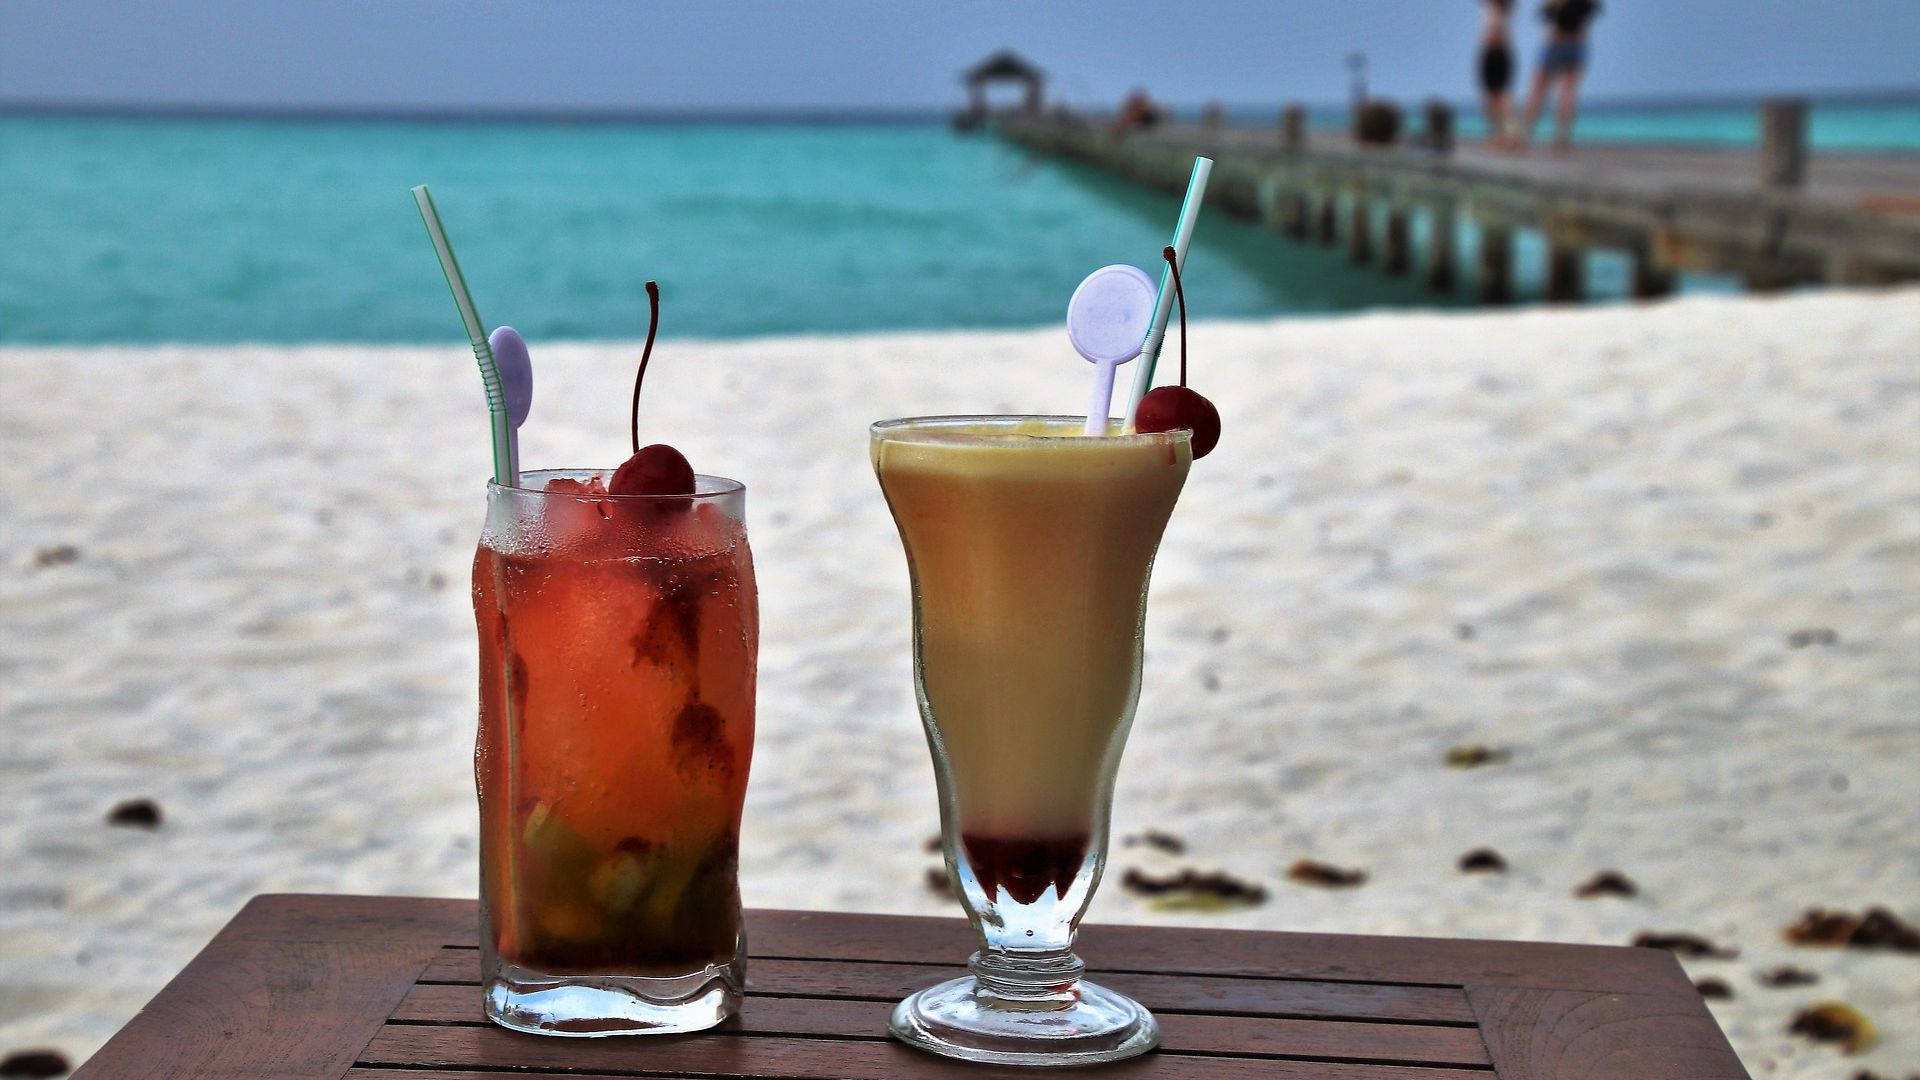 Holiday Beach Summer Cocktail Drinks View Free HD Image